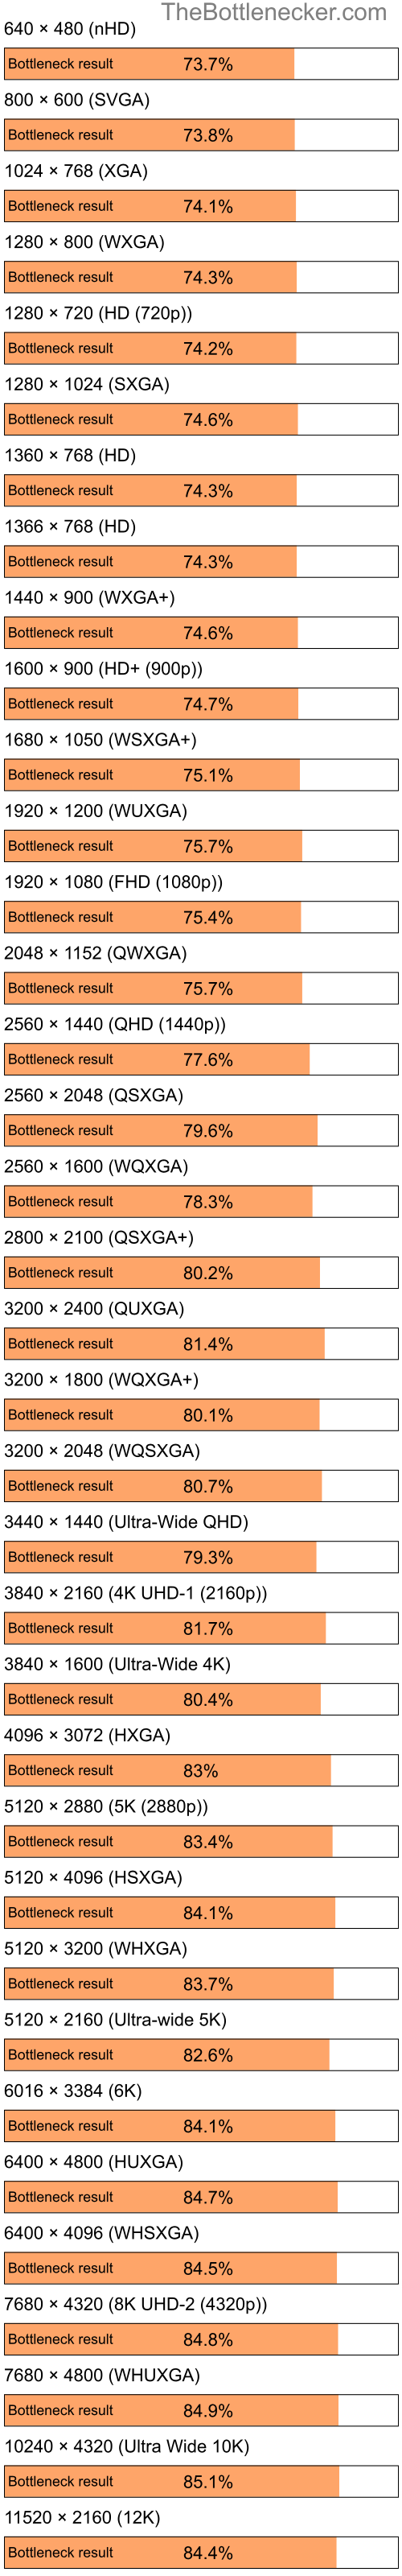 Bottleneck results by resolution for Intel Pentium 4 and AMD Radeon X1250 in General Tasks